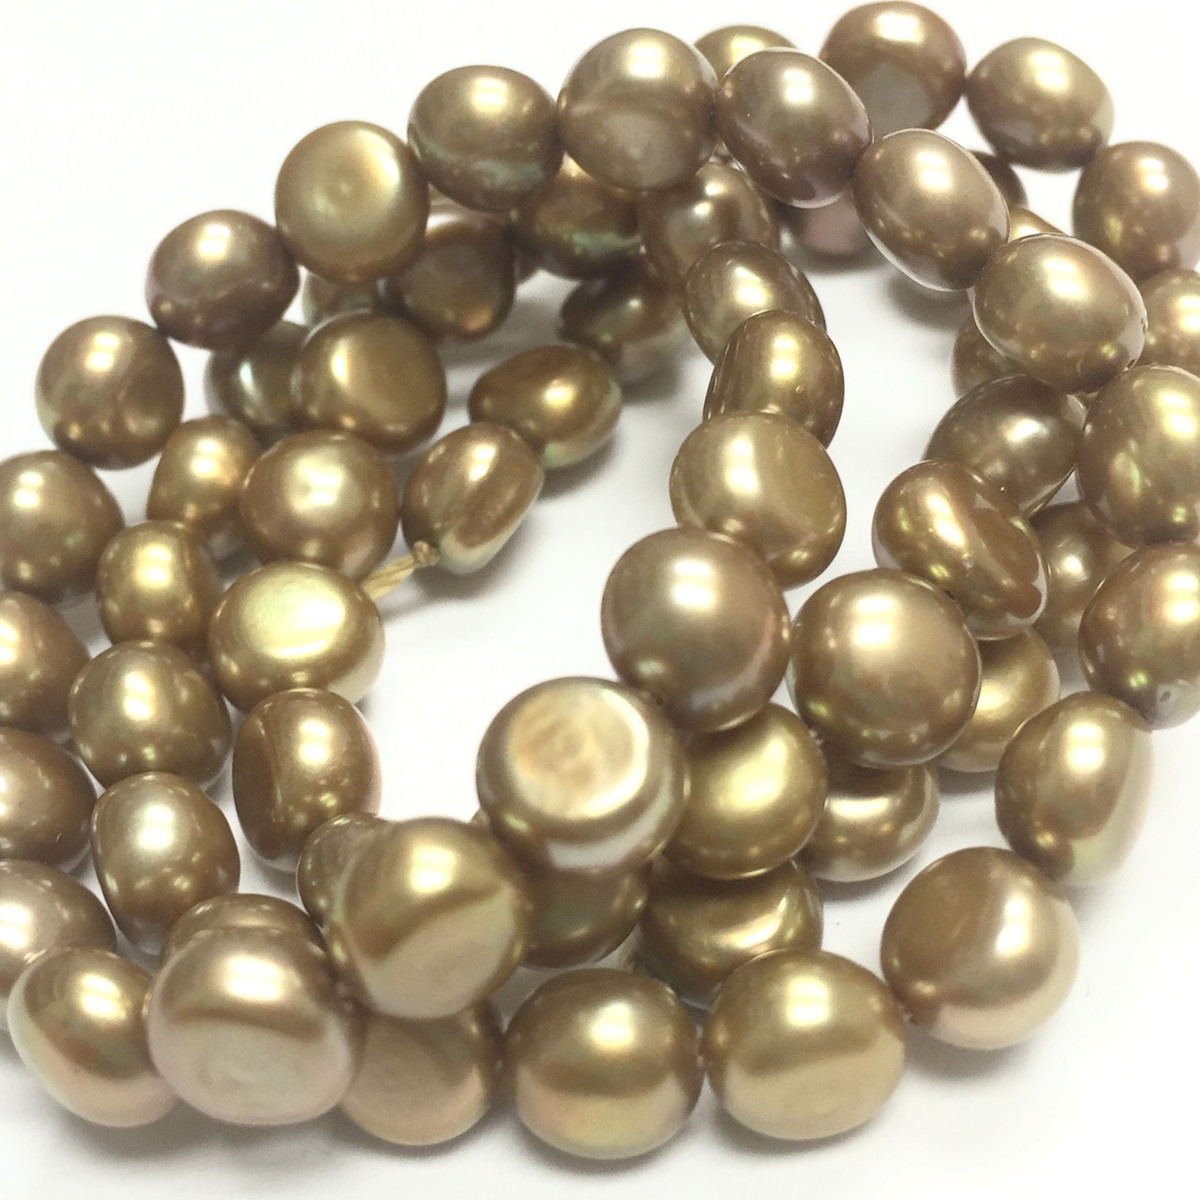 Golden Nugget Freshwater Pearl Beads - 10-11mm - A Grain of Sand